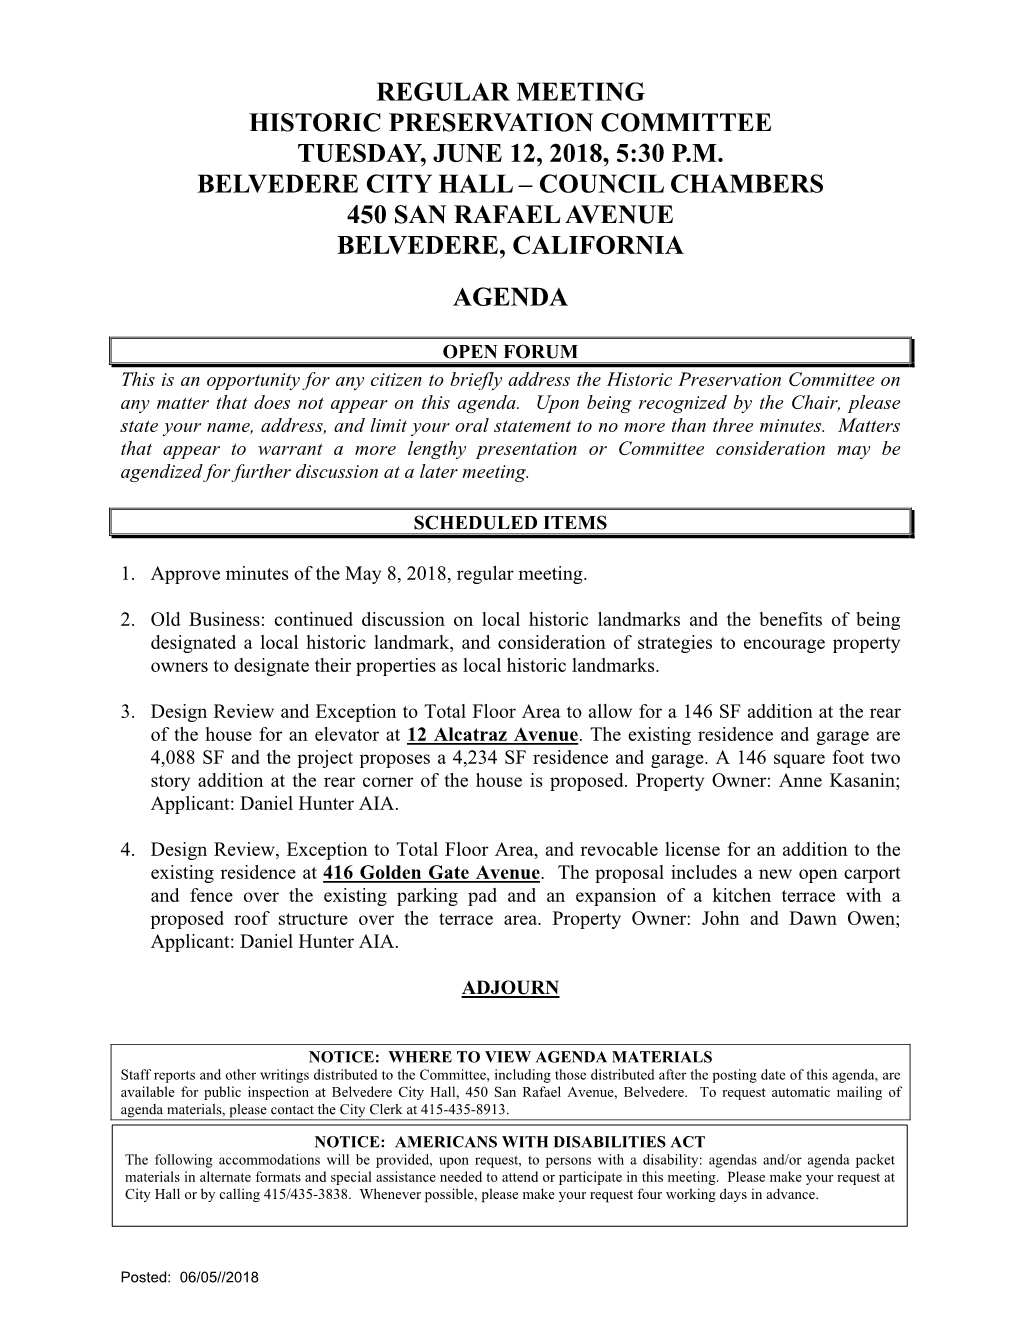 Regular Meeting Historic Preservation Committee Tuesday, June 12, 2018, 5:30 P.M. Belvedere City Hall – Council Chambers 450 San Rafael Avenue Belvedere, California